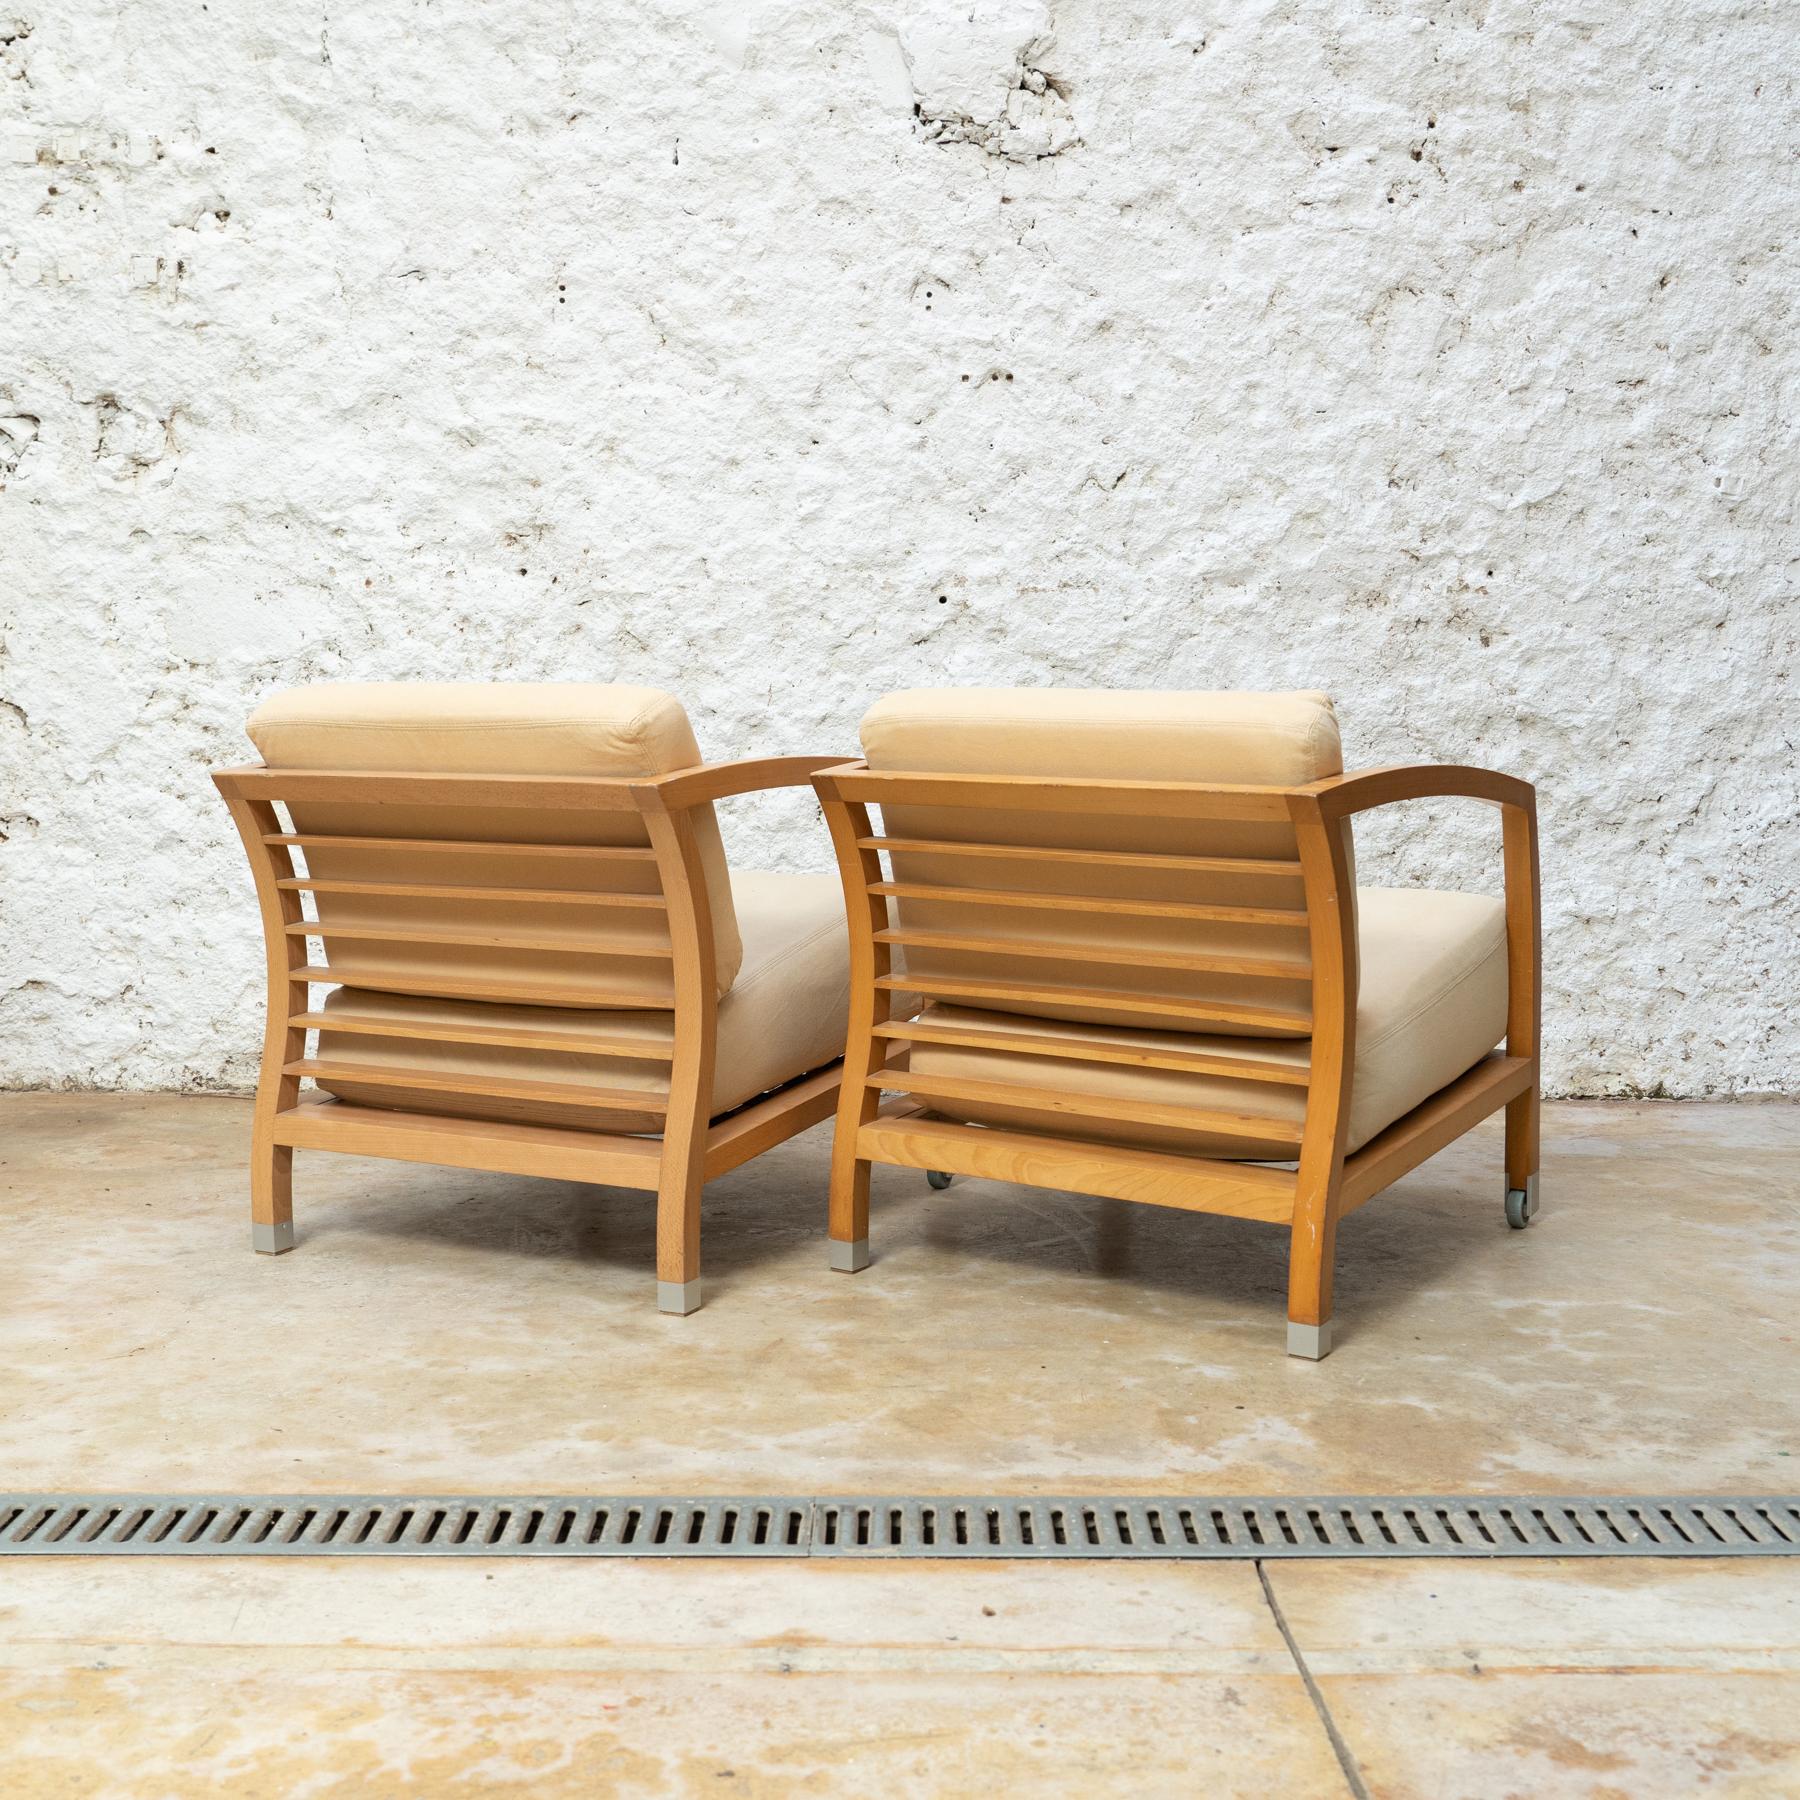 Wood Stua Malena Pair of Armchairs: Contemporary Spanish Design For Sale